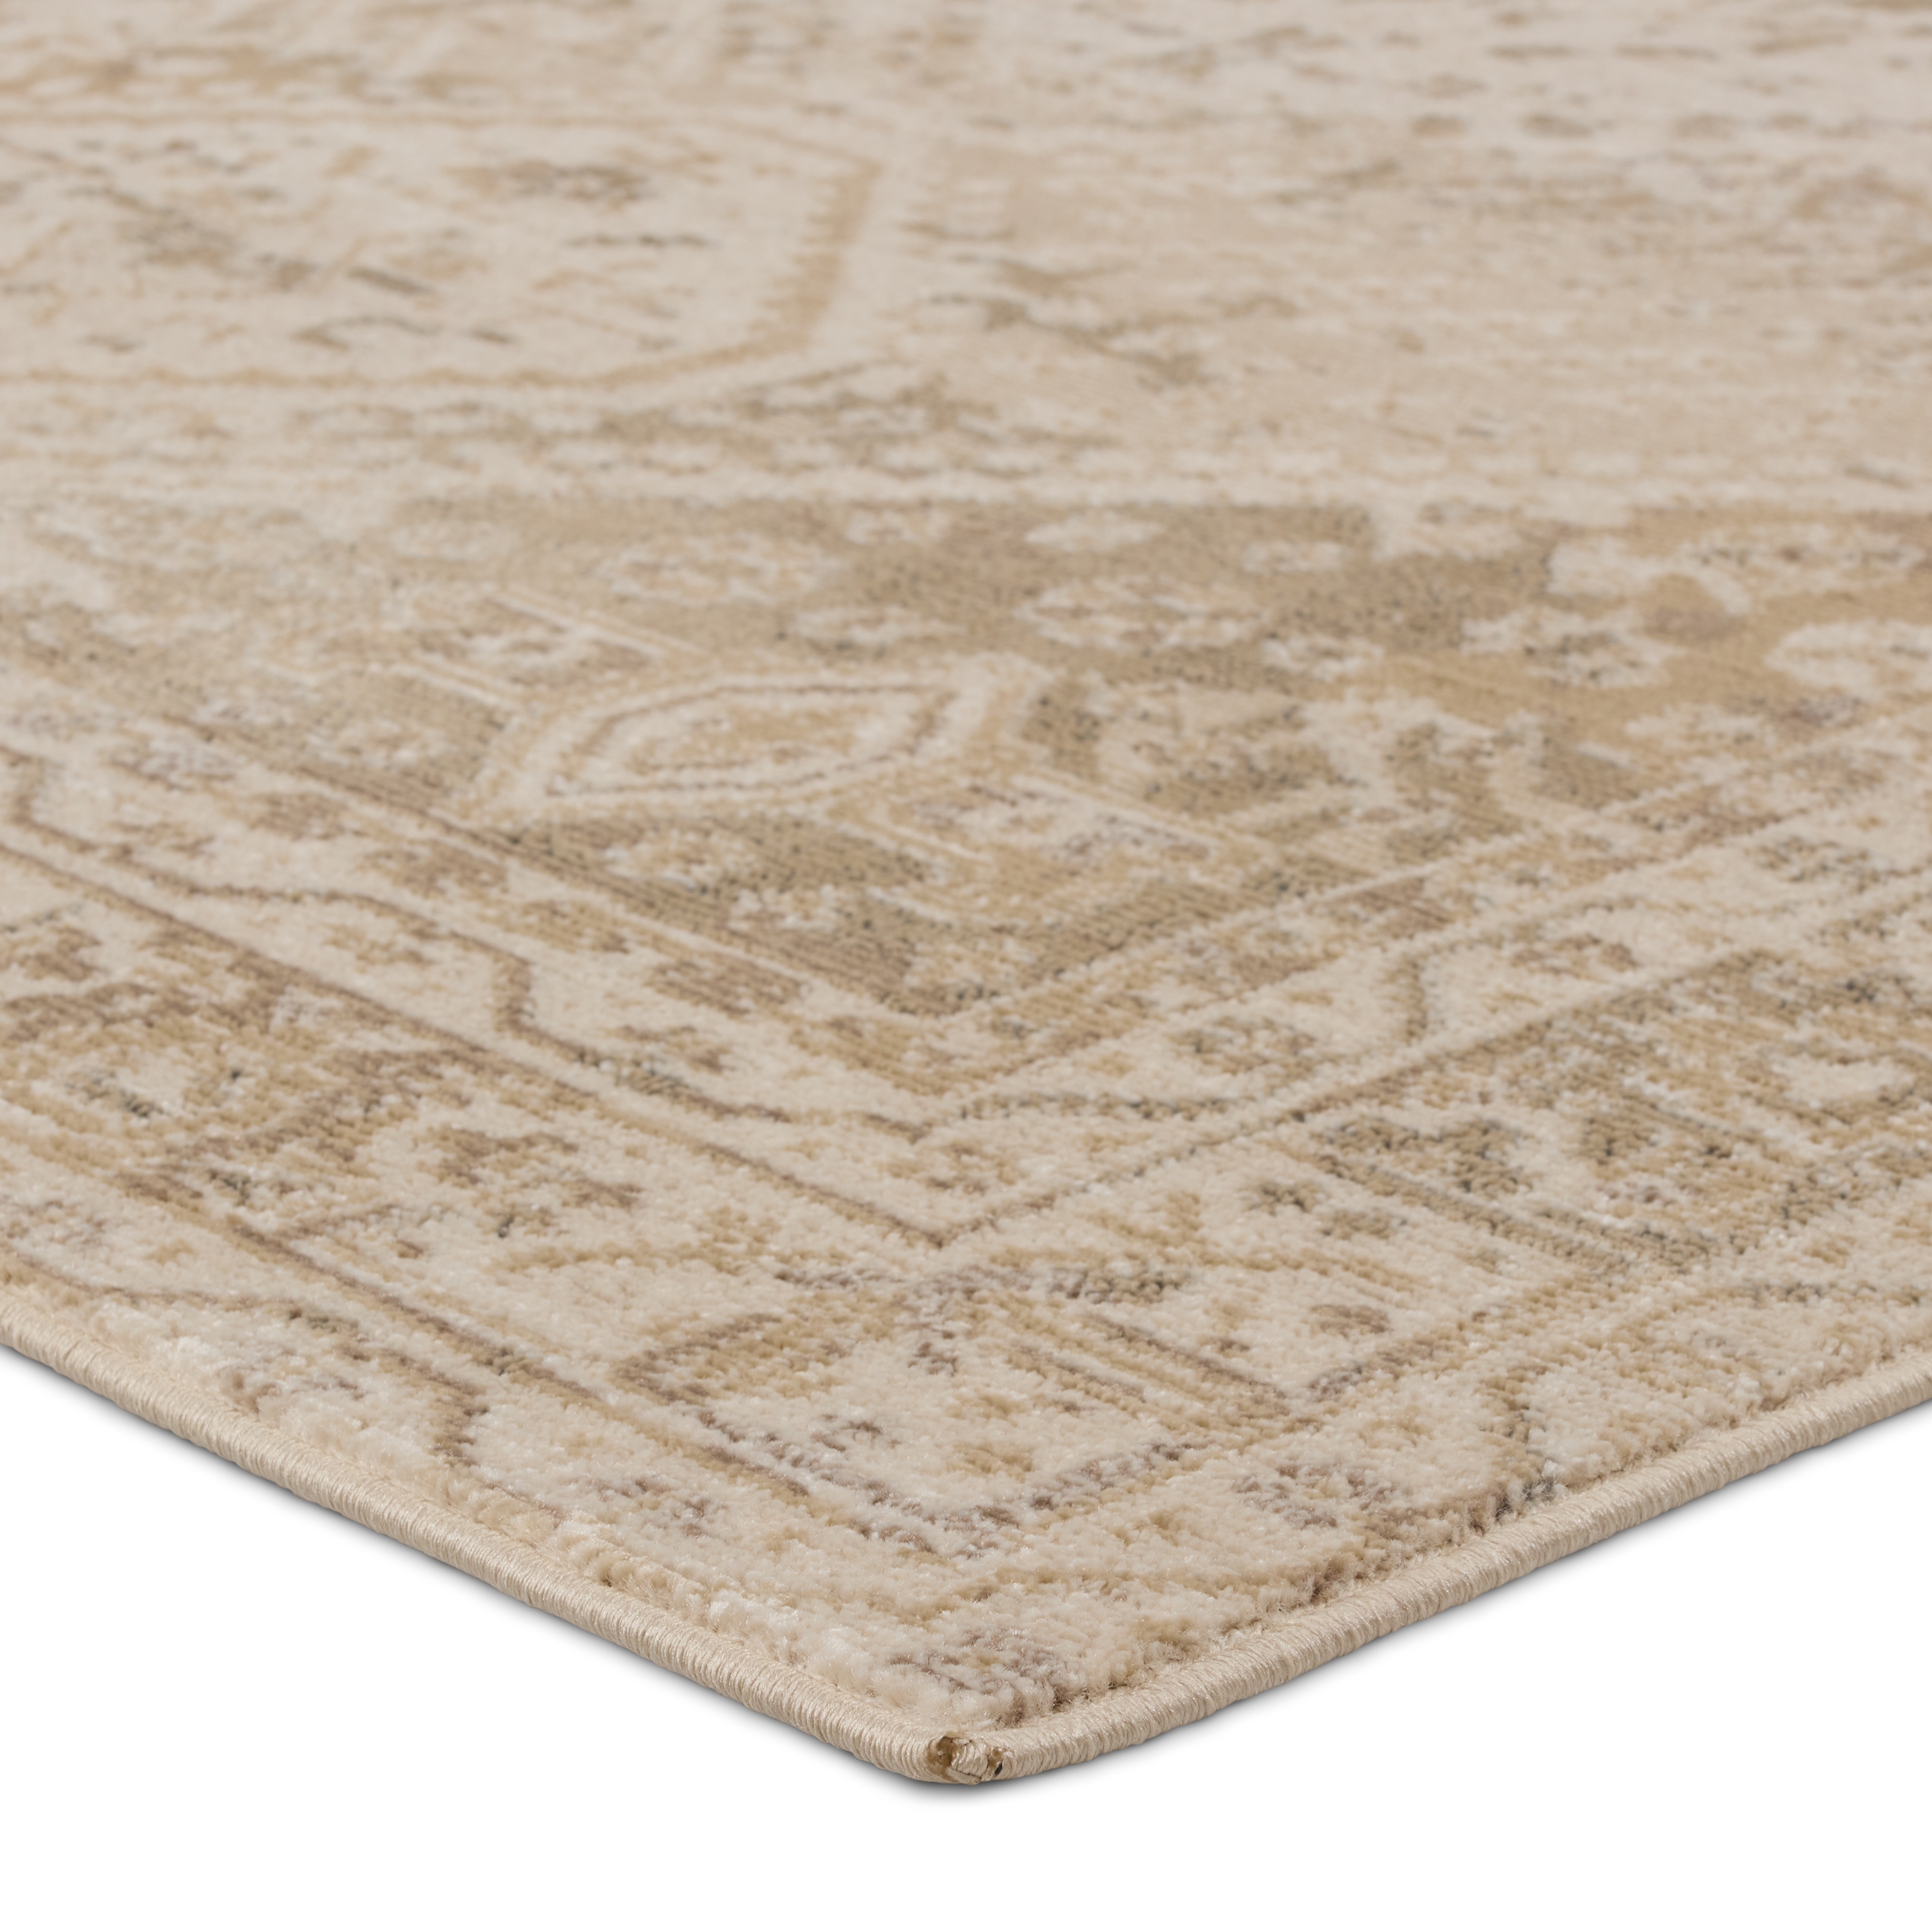 Vibe by Rush Indoor/Outdoor Medallion Beige/ Tan Area Rug (8'X10') - Image 1